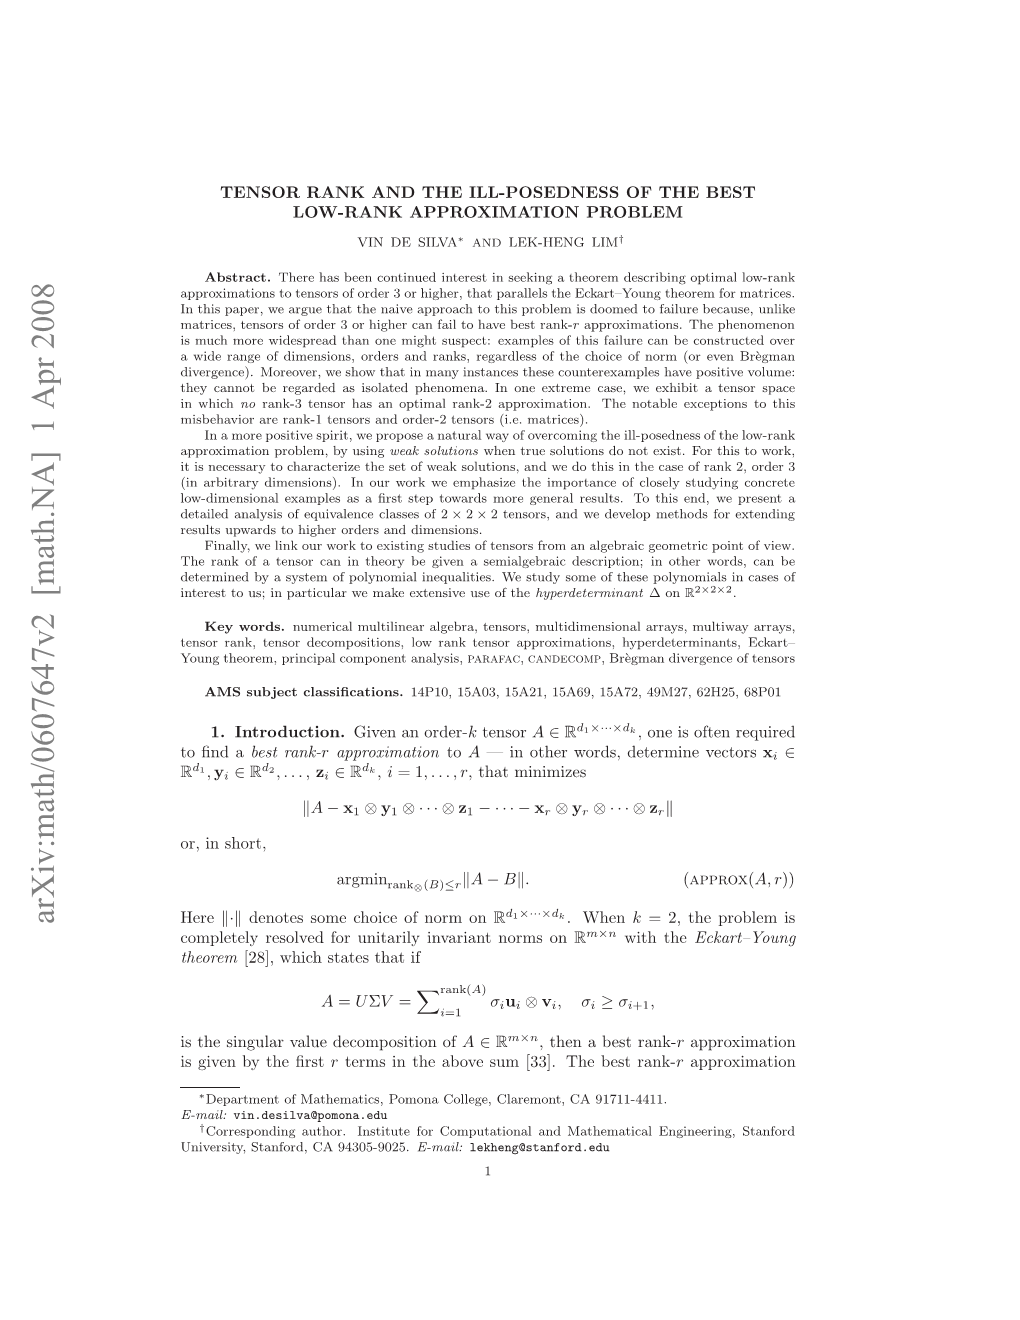 Arxiv:Math/0607647V2 [Math.NA] 1 Apr 2008 Neett S Npriua Emk Xesv S Fthe Des of Semialgebraic Use Extensive a Make Given Study We We Particular Be in Inequalities